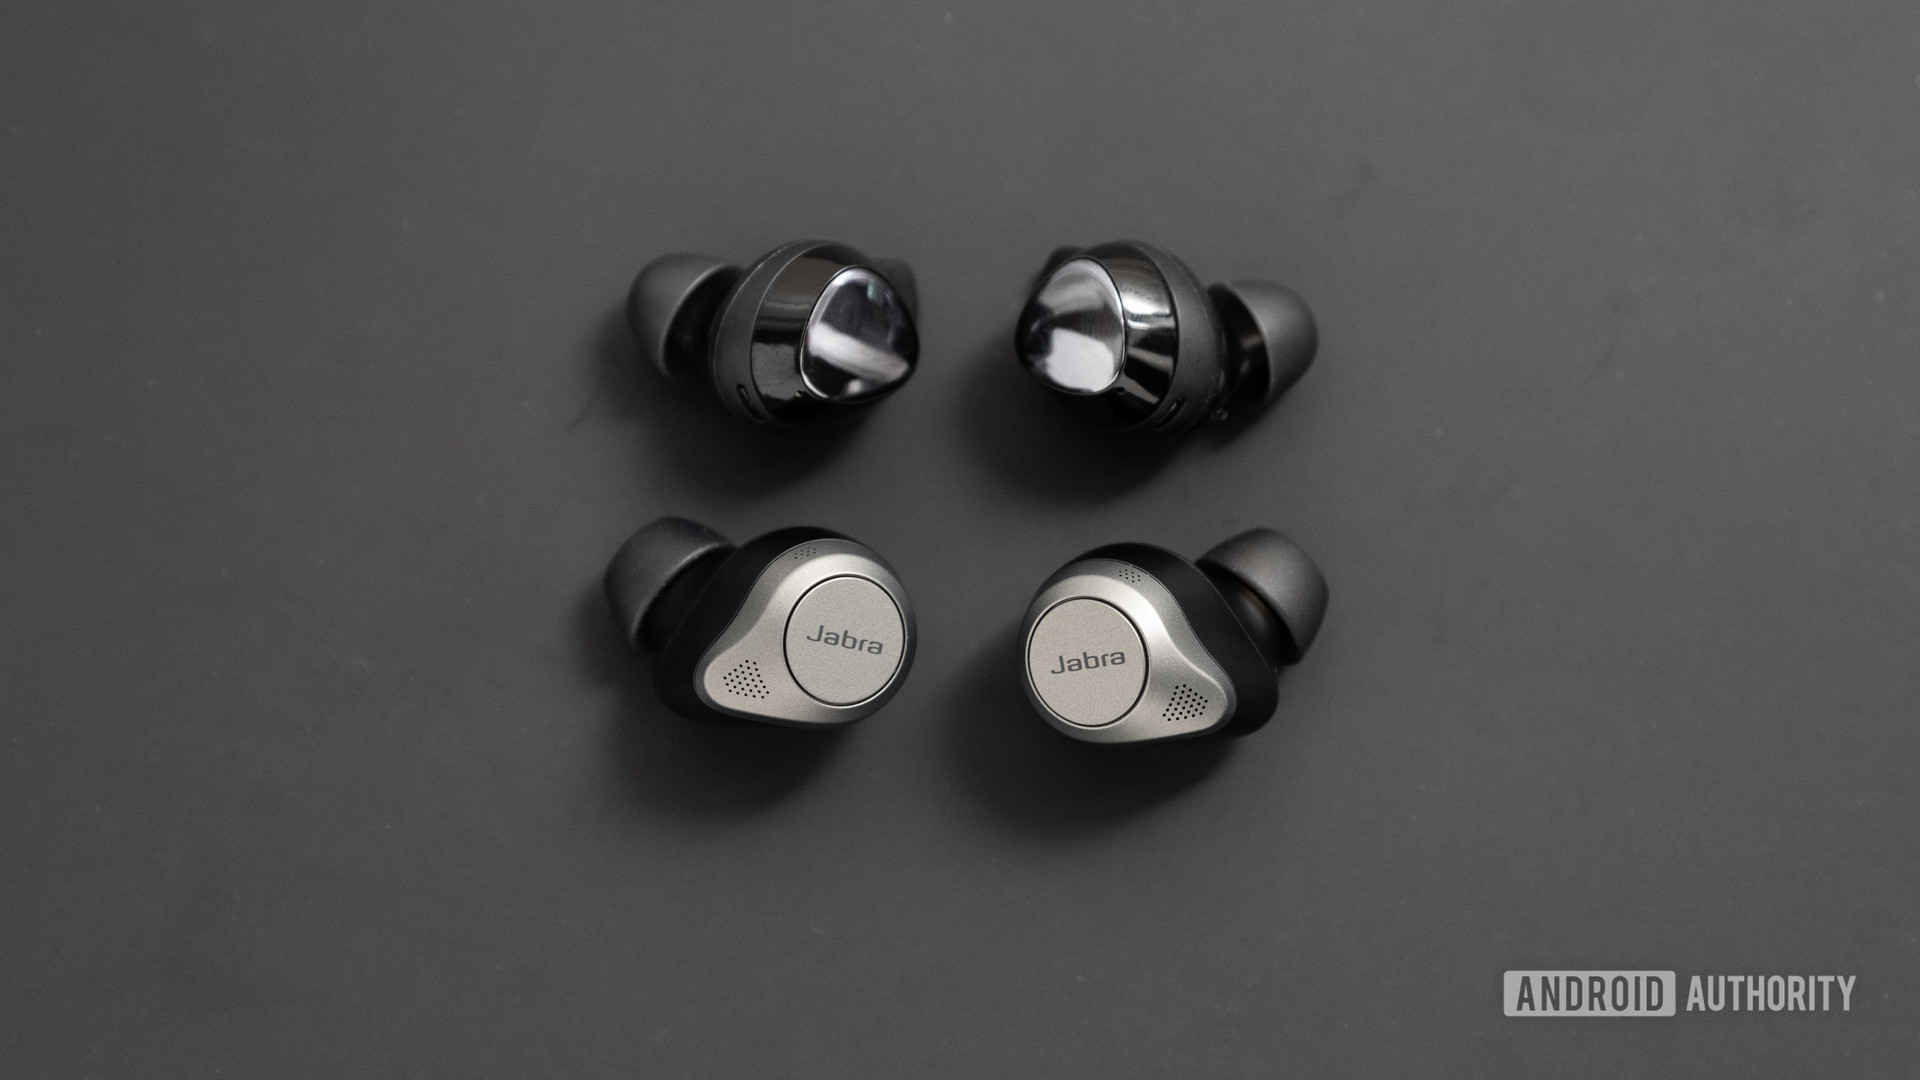 The Jabra Elite 85t noise cancelling true wireless earbuds compared to the Samsung Galaxy Buds Plus, which are smaller than Jabra's buds.